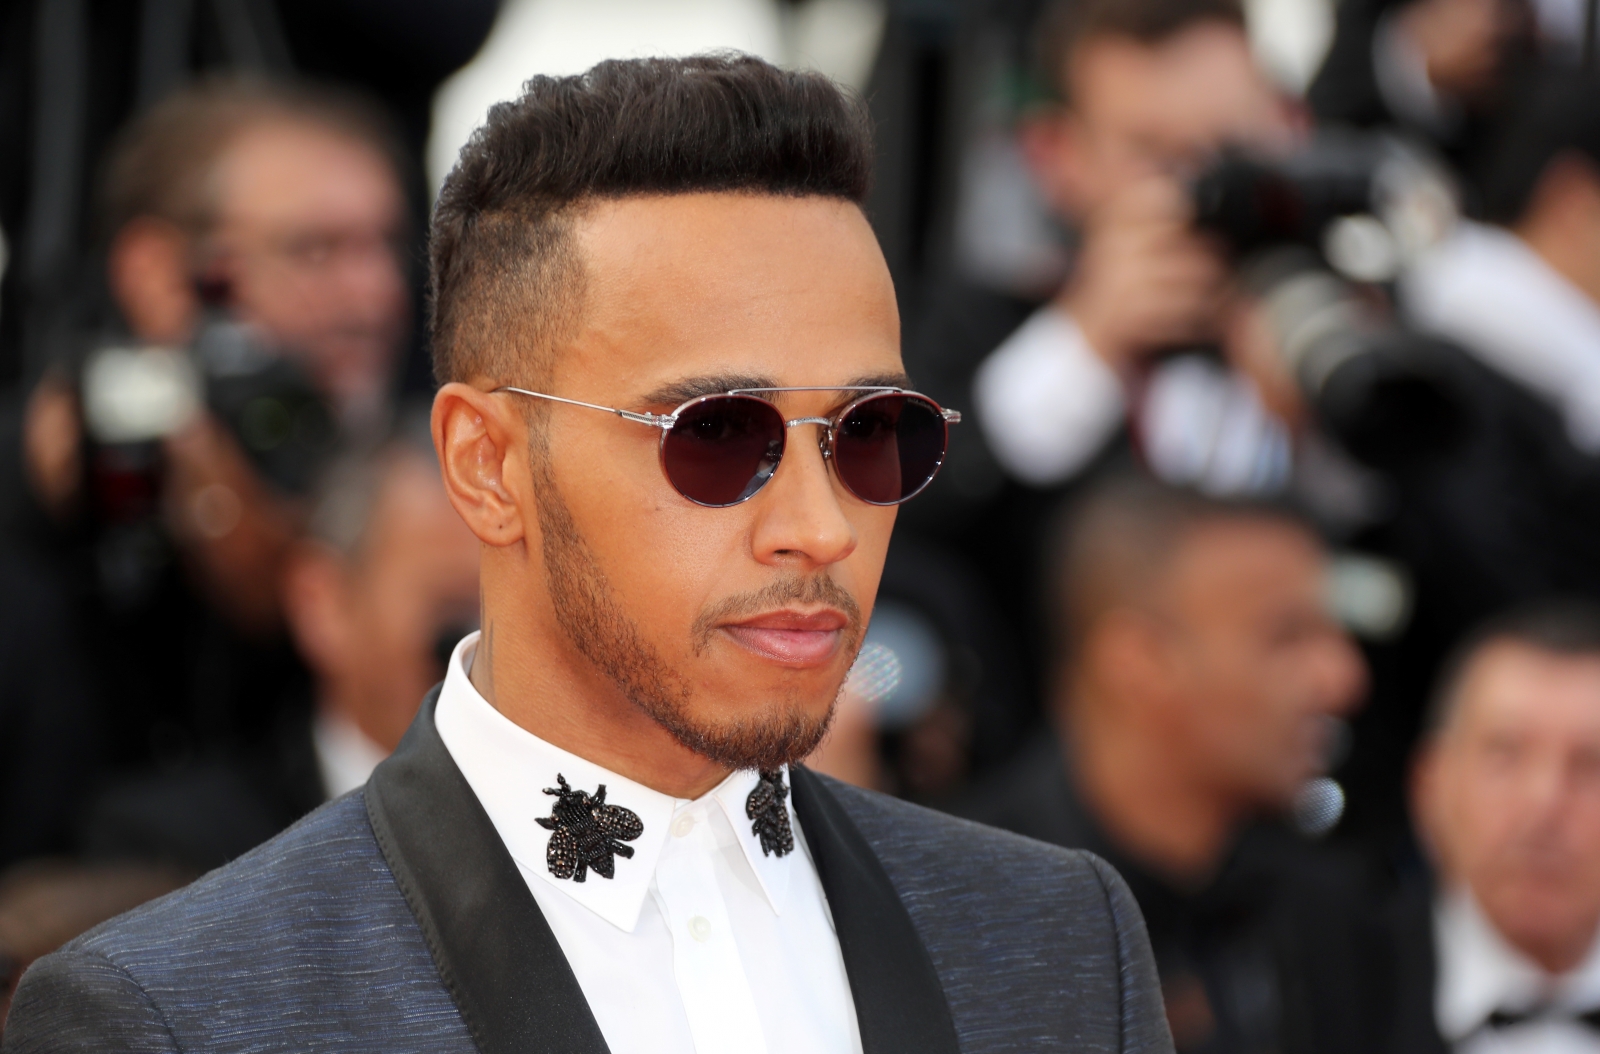 Lewis Hamilton did not prefer his cars to former girlfriend Nicole